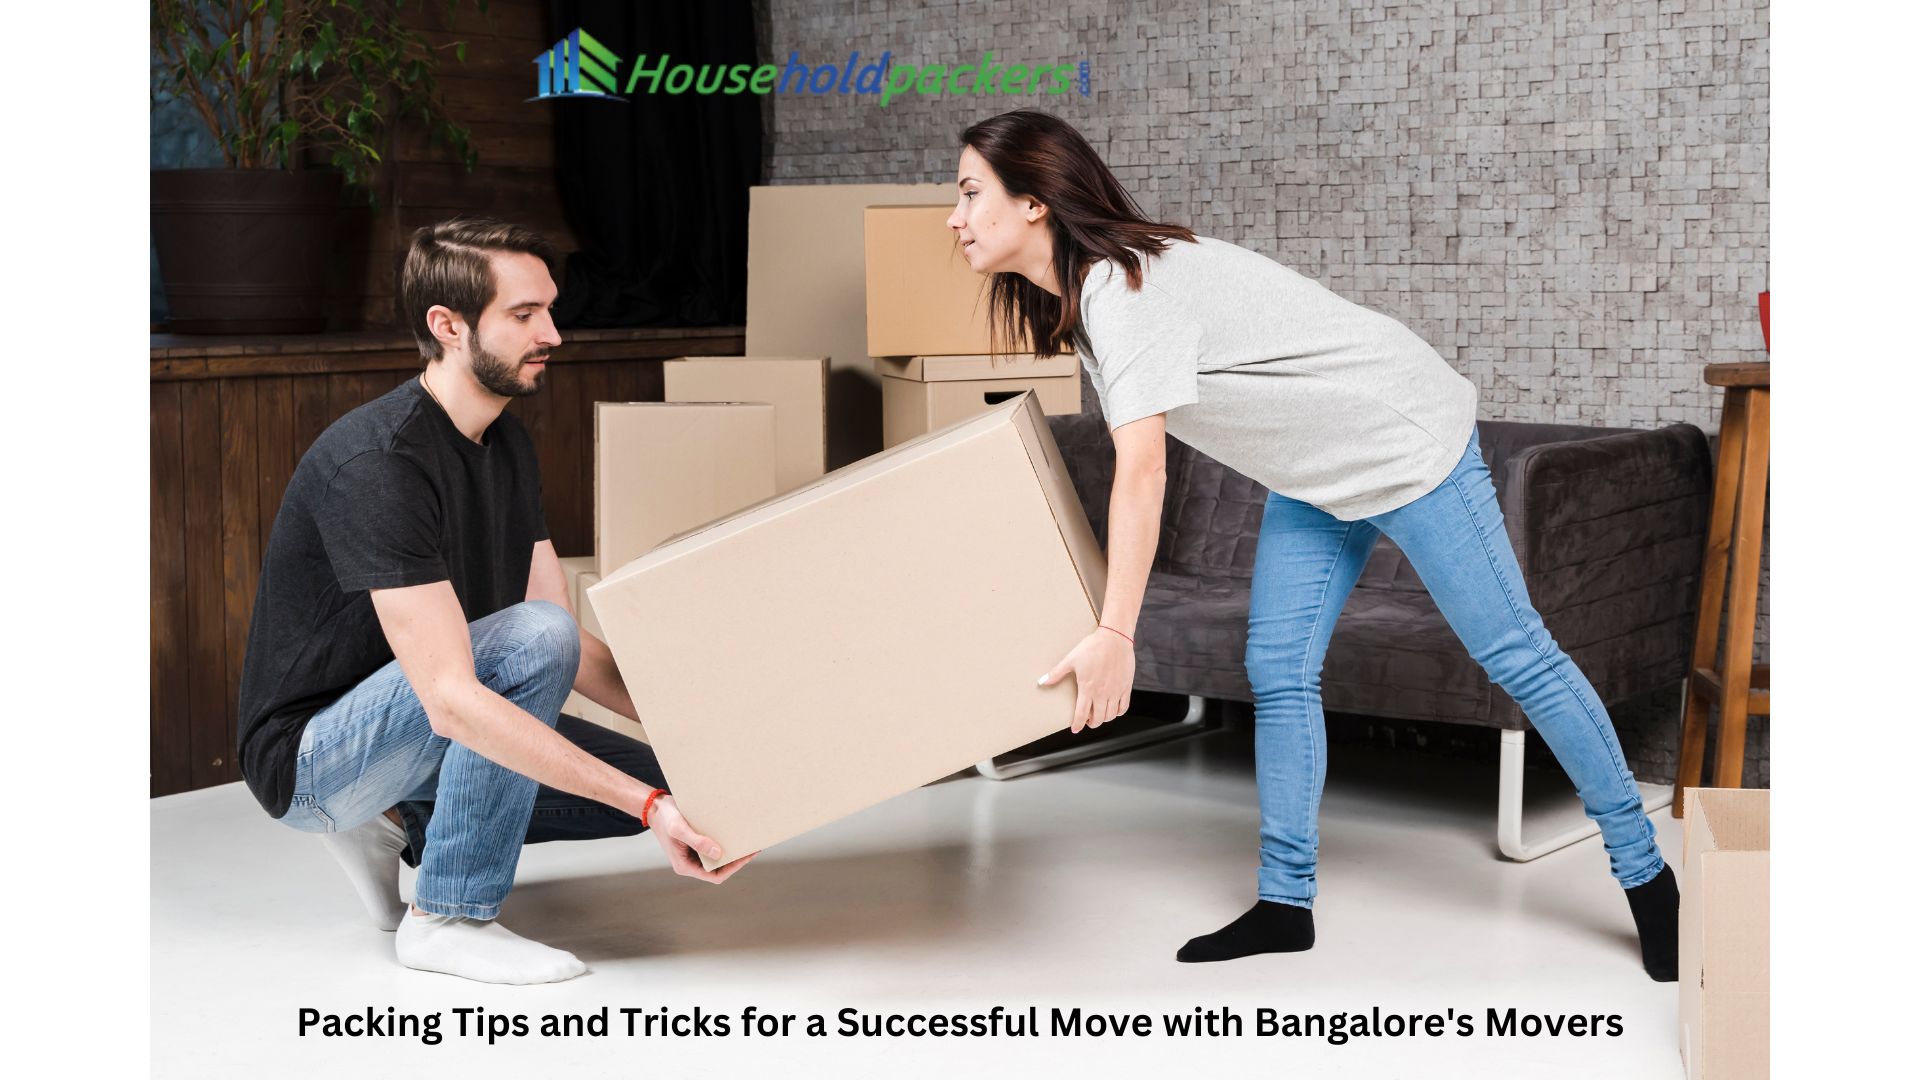 Packing Tips and Tricks for a Successful Move with Bangalore Movers